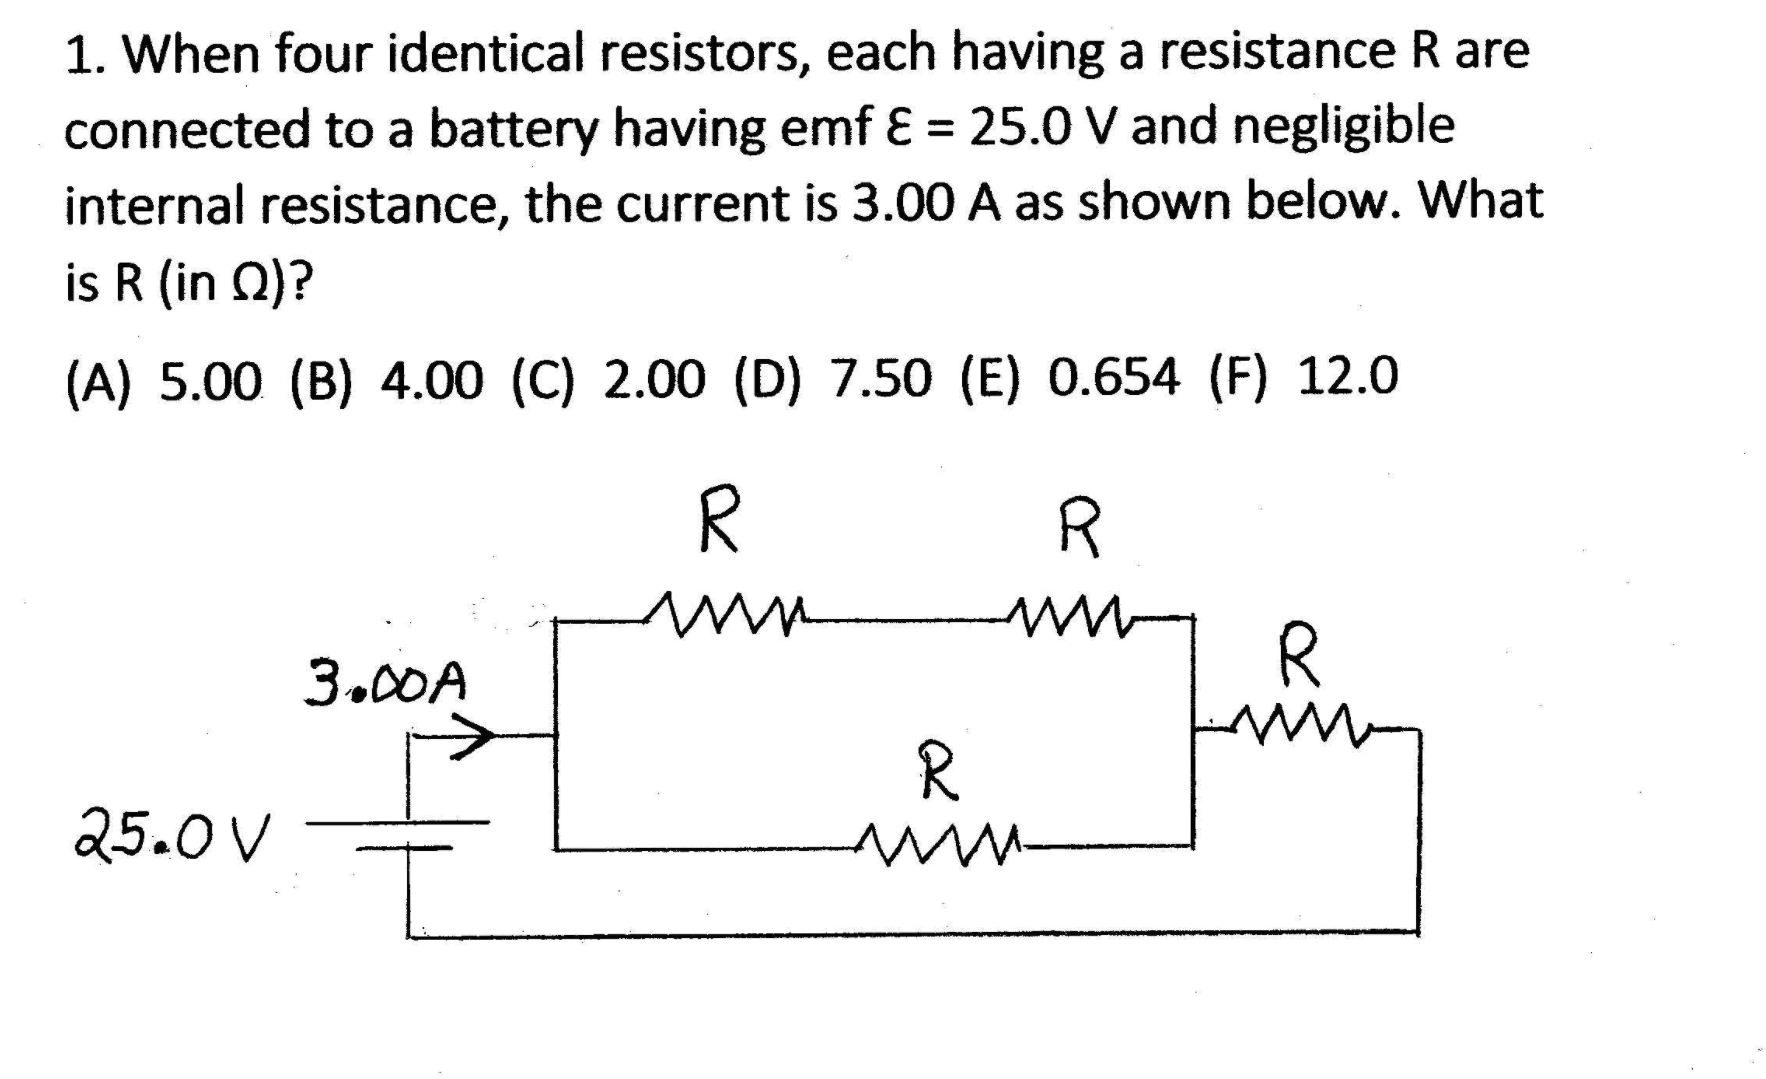 1. When four identical resistors, each having a resistance R are
connected to a battery having emf E = 25.0 V and negligible
%3D
internal resistance, the current is 3.00 A as shown below. What
is R (in Q)?
(A) 5.00 (B) 4.00 (C) 2.00 (D) 7.50 (E) 0.654 (F) 12.0
R.
3.00A
R.
25.0 V
